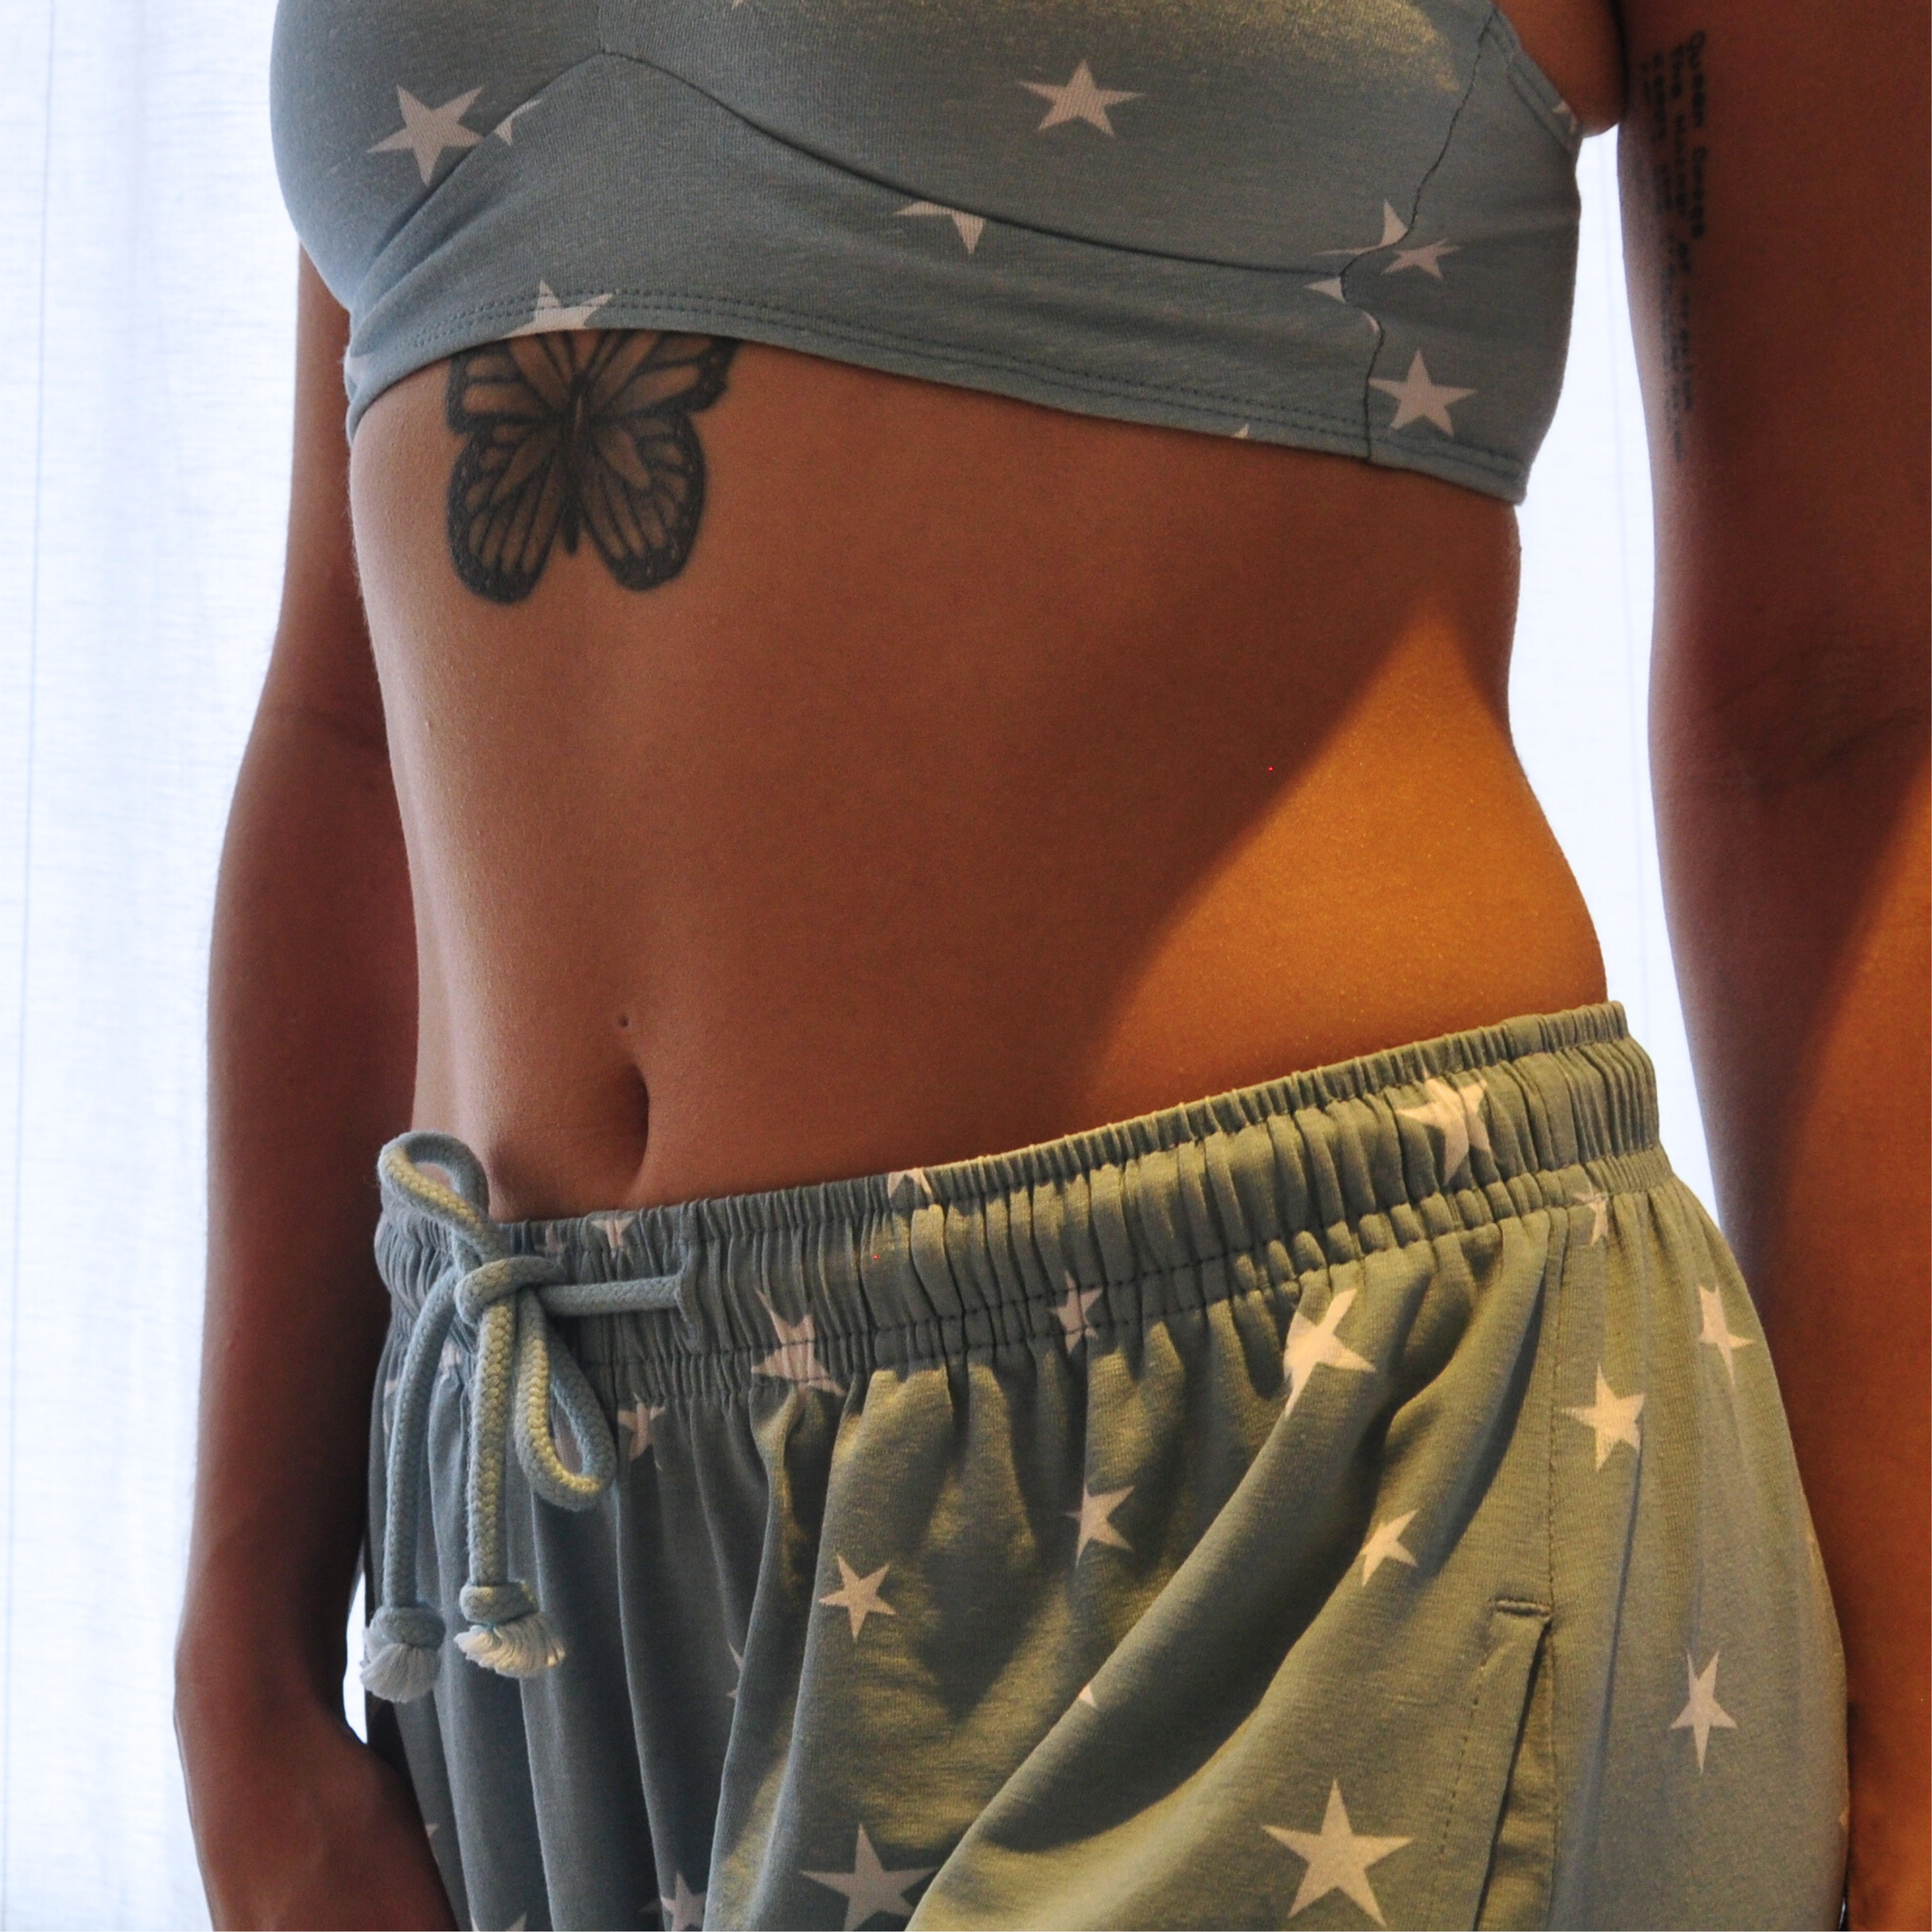 A person stands in front of a light curtain, showing their midsection. They are wearing a light blue bralette with white stars and matching pyjama bottoms. There is a butterfly tattoo under their chest and script text tattooed vertically on their right side.